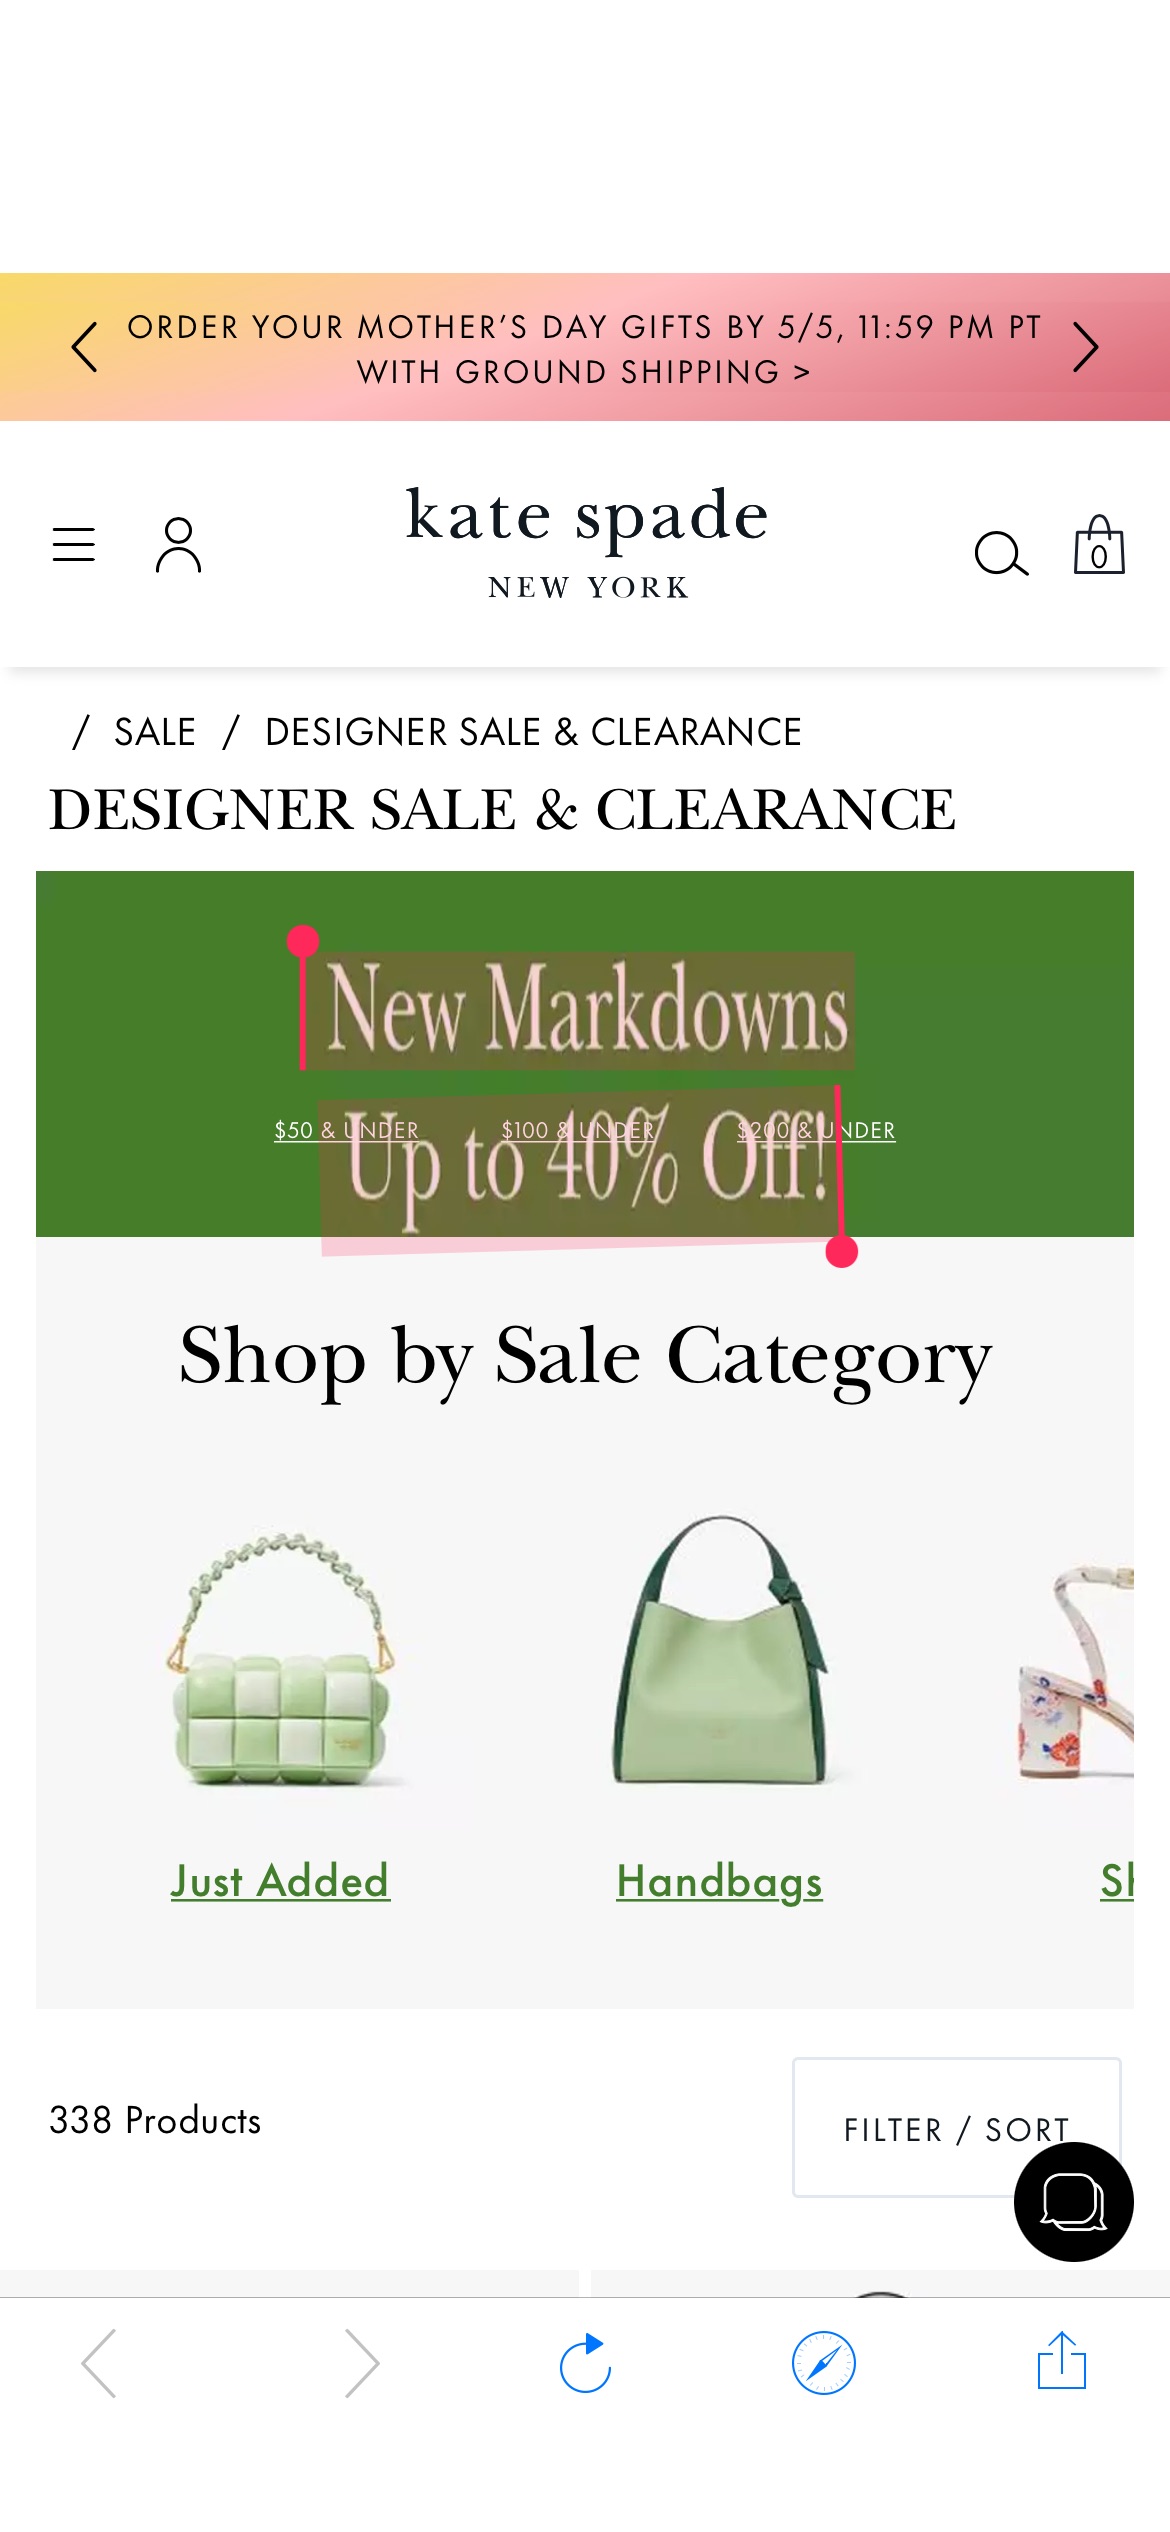 New Markdowns
Up to 40% Off!